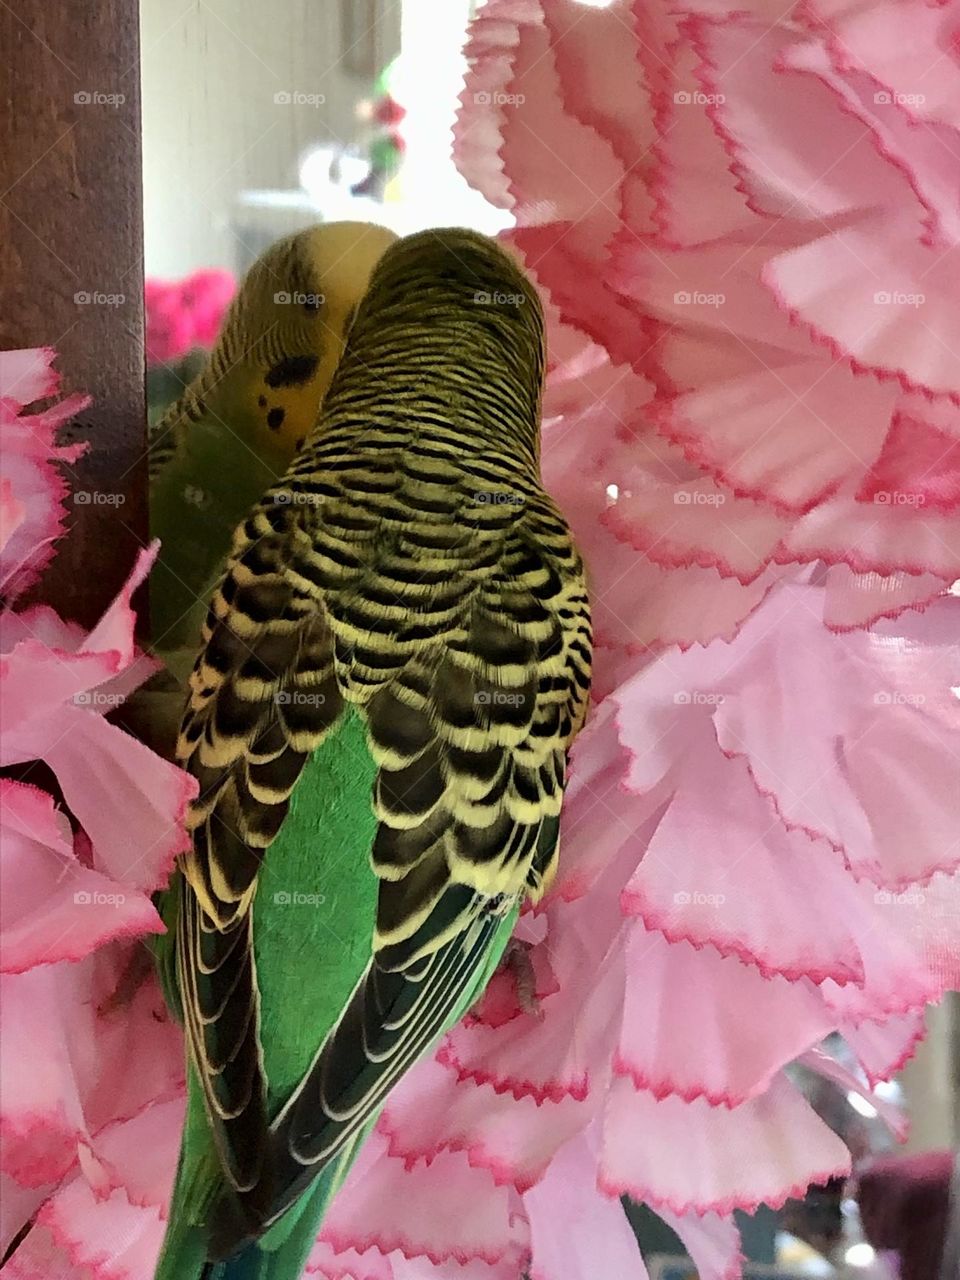 Checking out the Mirror  while relaxing Kiwi 🦜